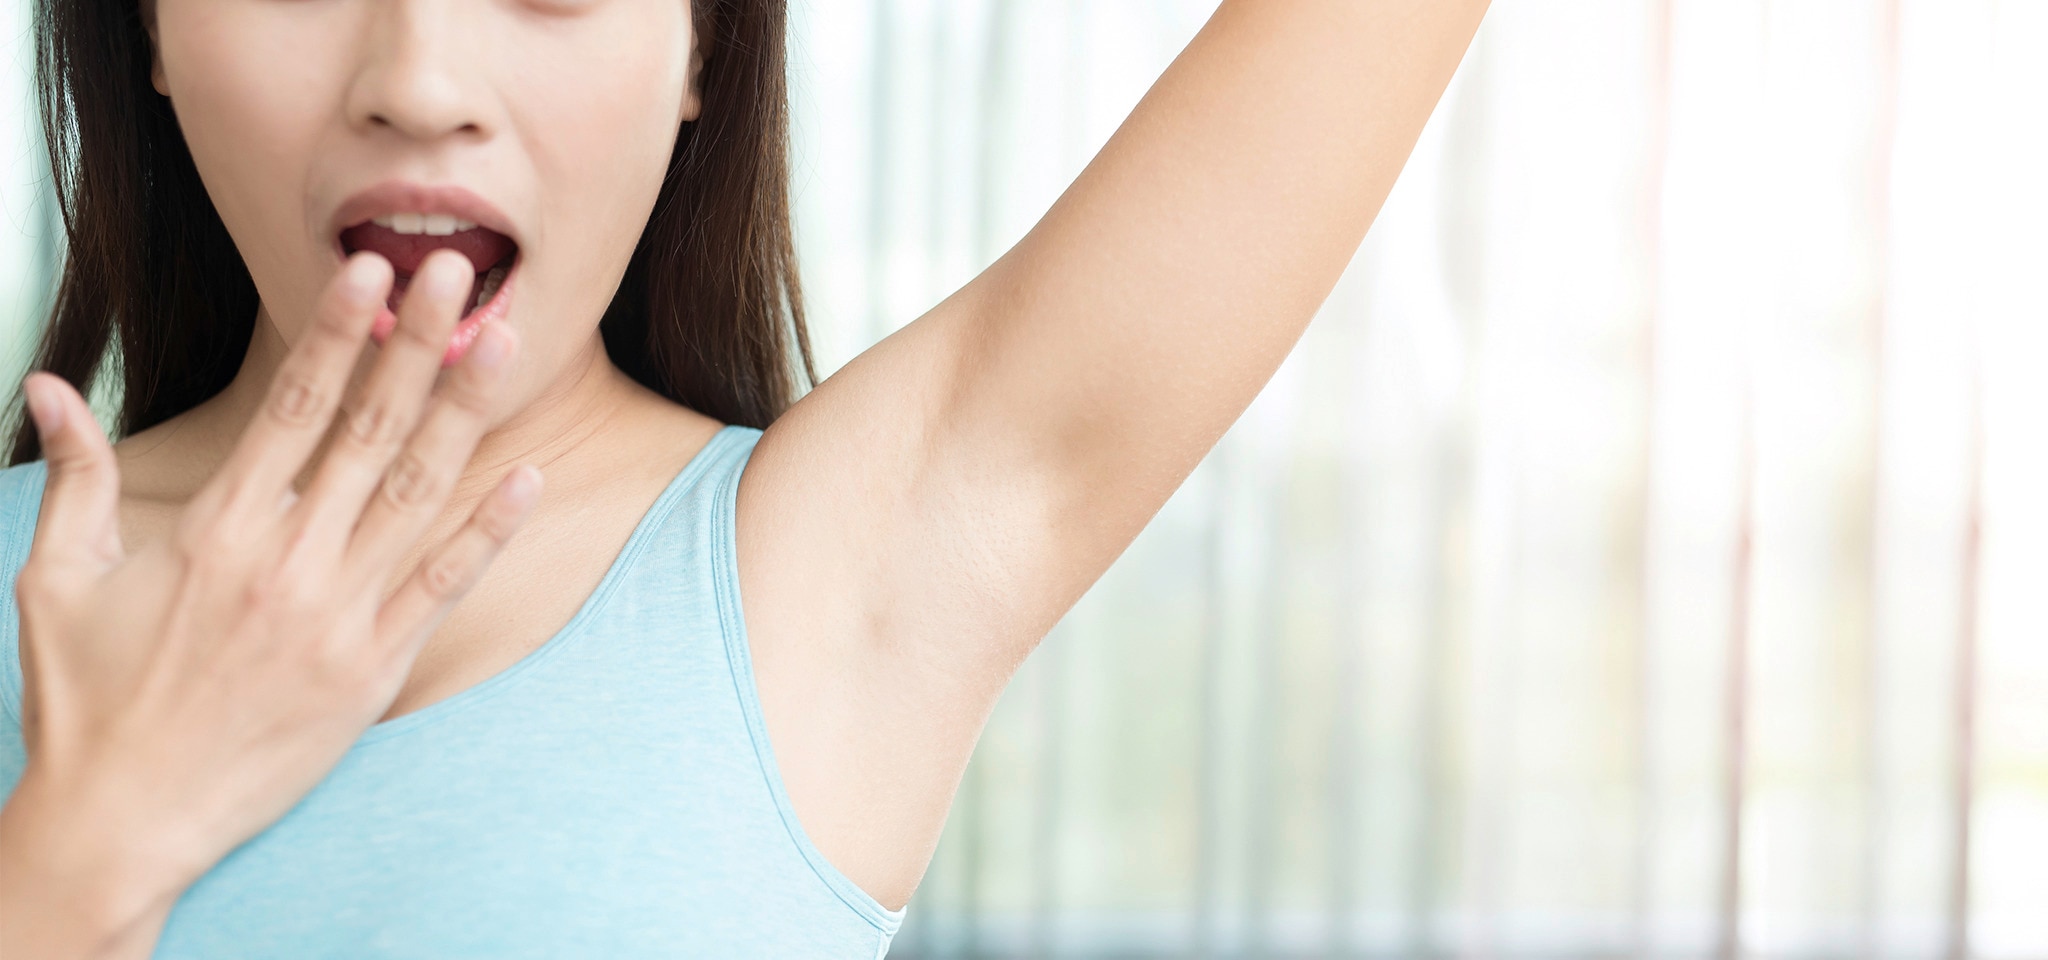 A woman showing off her armpit in a blue tank top